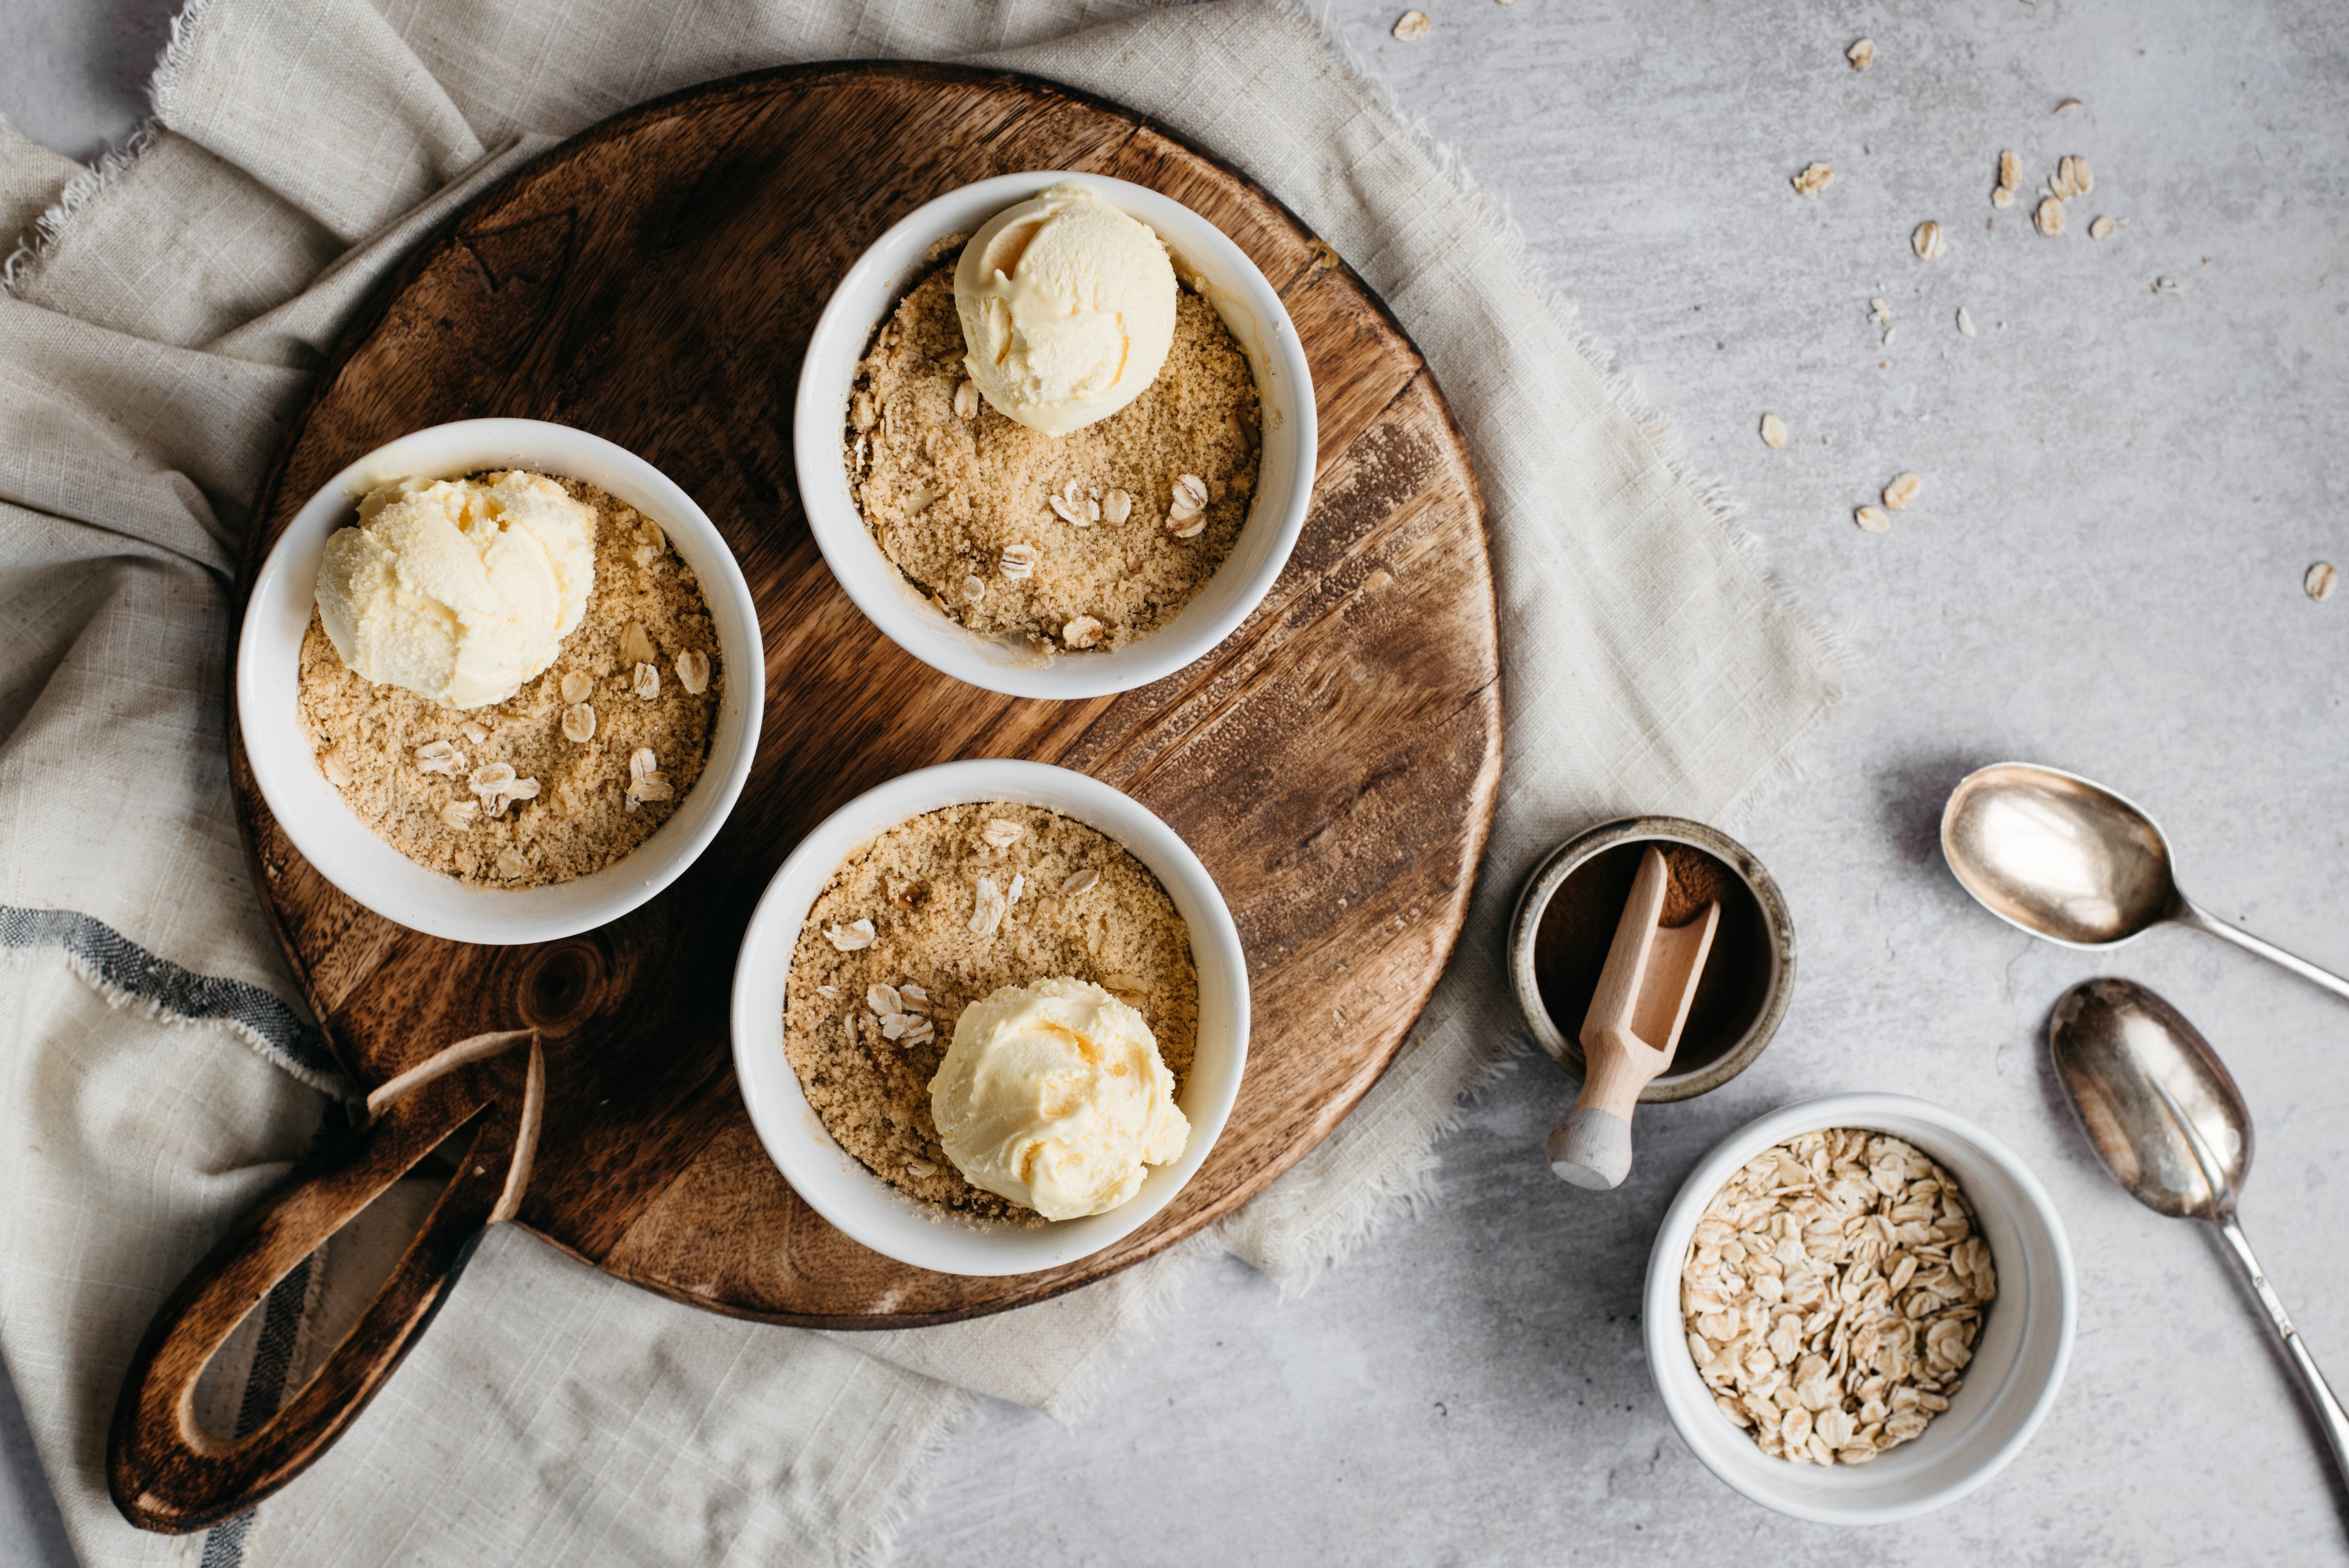 Mini Apple & Cinnamon Crumbles served in ramekin dishes, next to bowls of oats and served with a dollop of ice cream